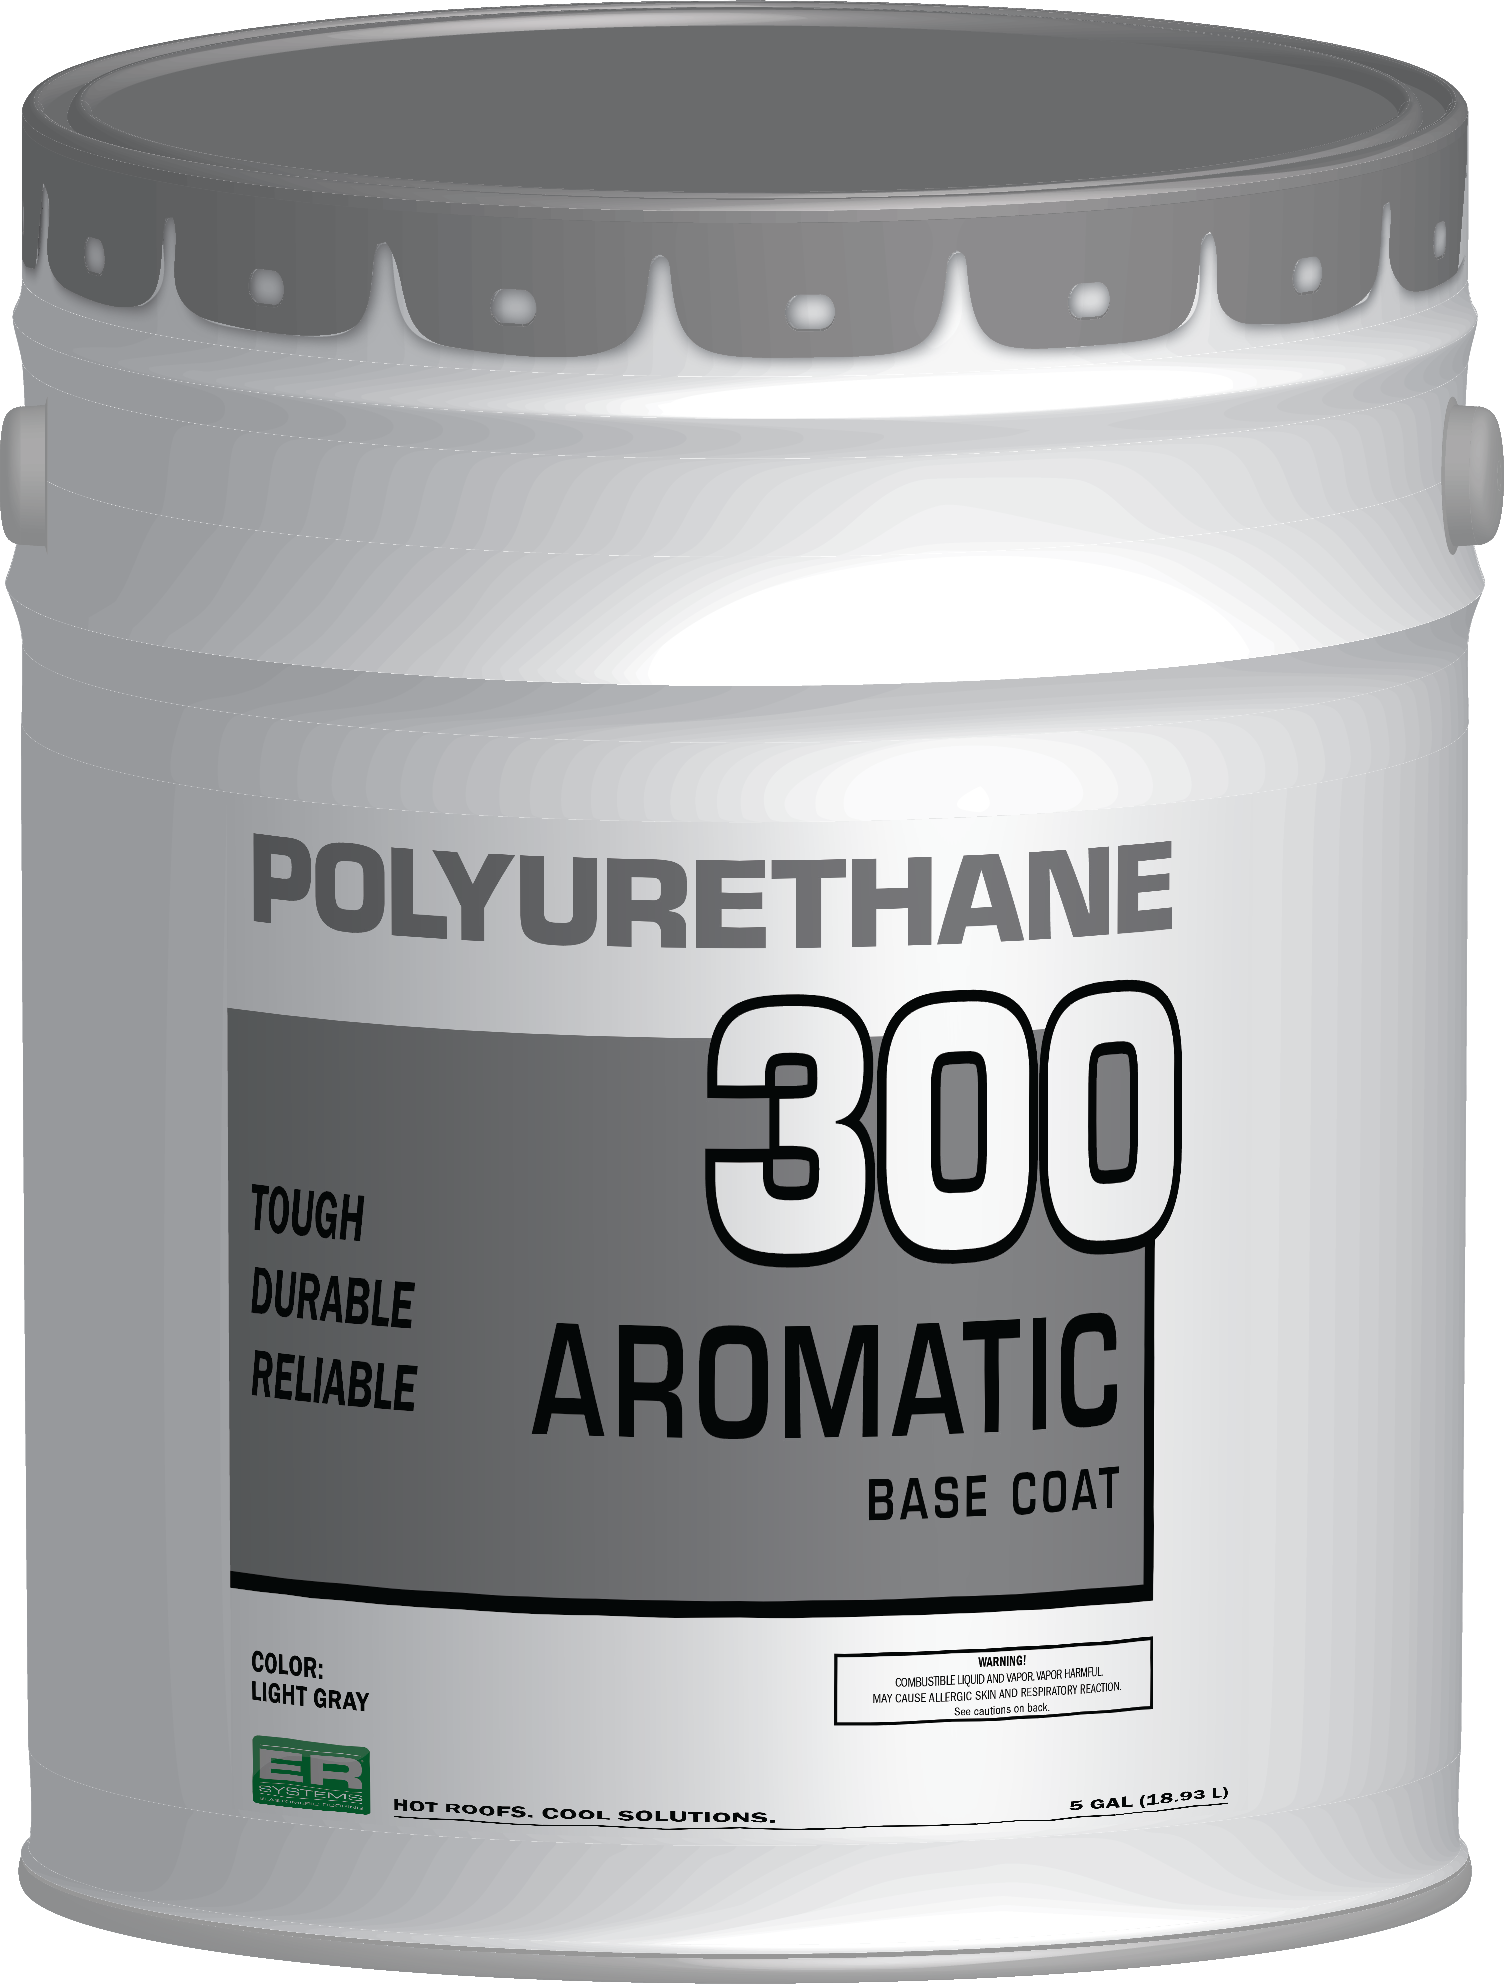 Read more about the article Polyurethane 300 Aromatic Base Coat